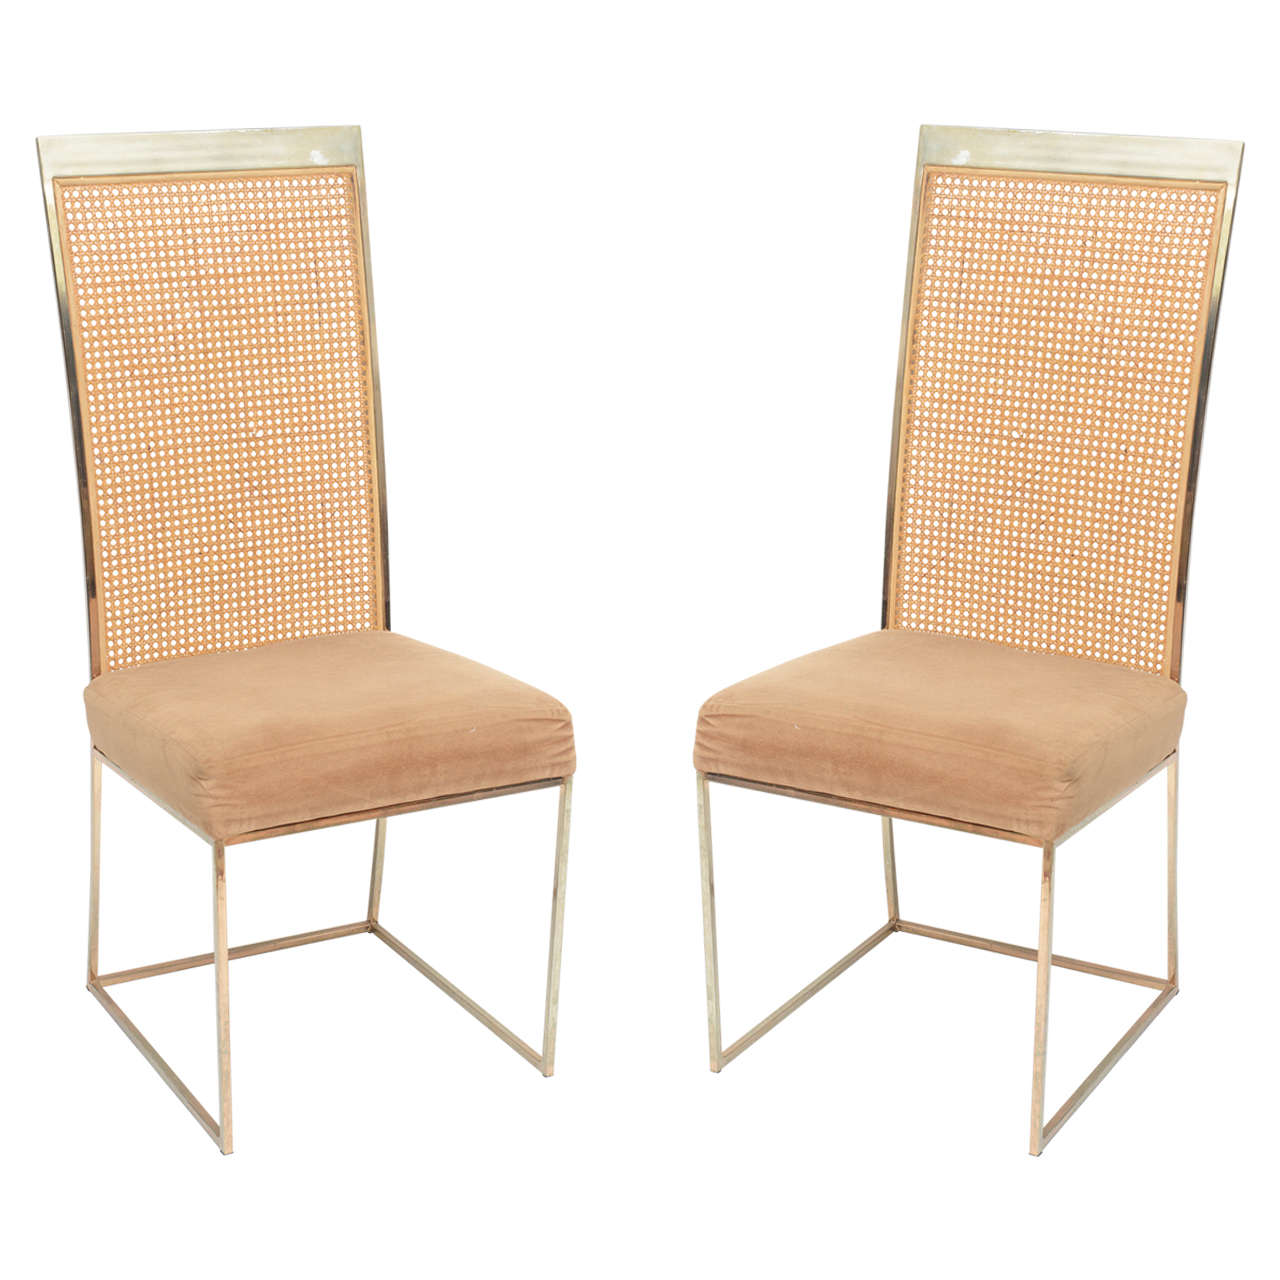 Pair of Milo Baughman Cane and Brass Chairs, USA, 1970s